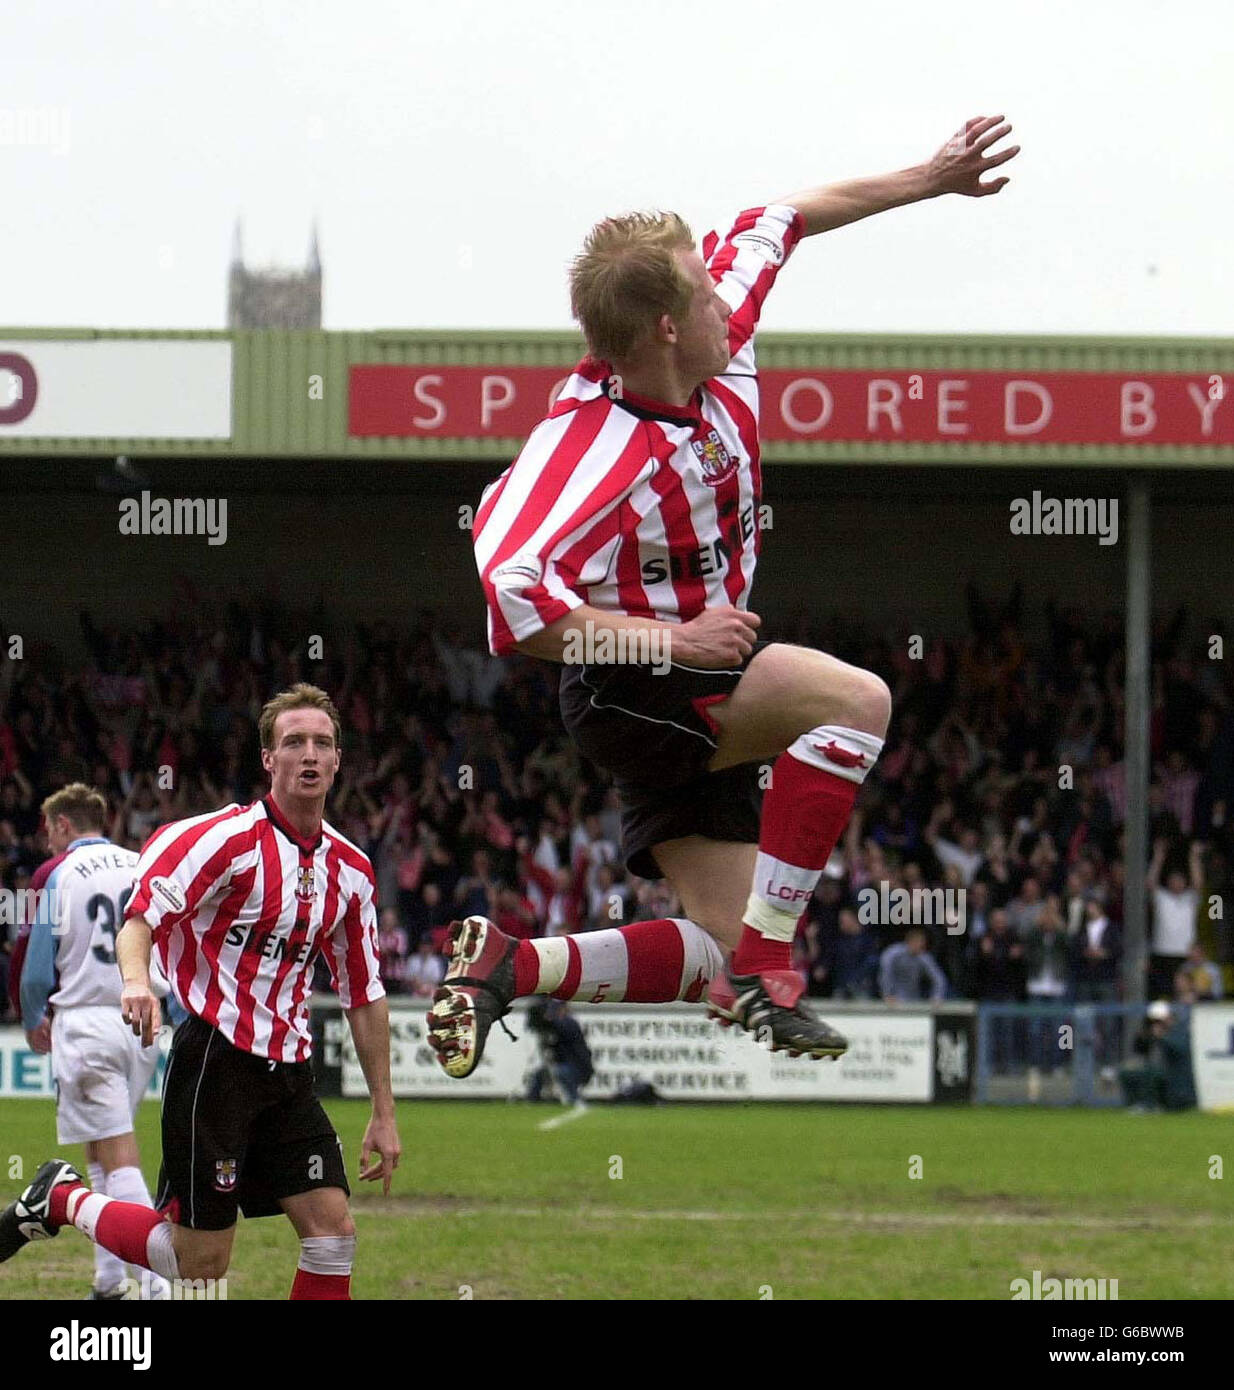 Lincoln's Paul Mayo leaps in delight after putting his team 2-0 up against Scunthorpe, during their Nationwide Division Three semi-final 1st leg match at Sincil Bank, Lincoln NO UNOFFICIAL CLUB WEBSITE USE. Stock Photo